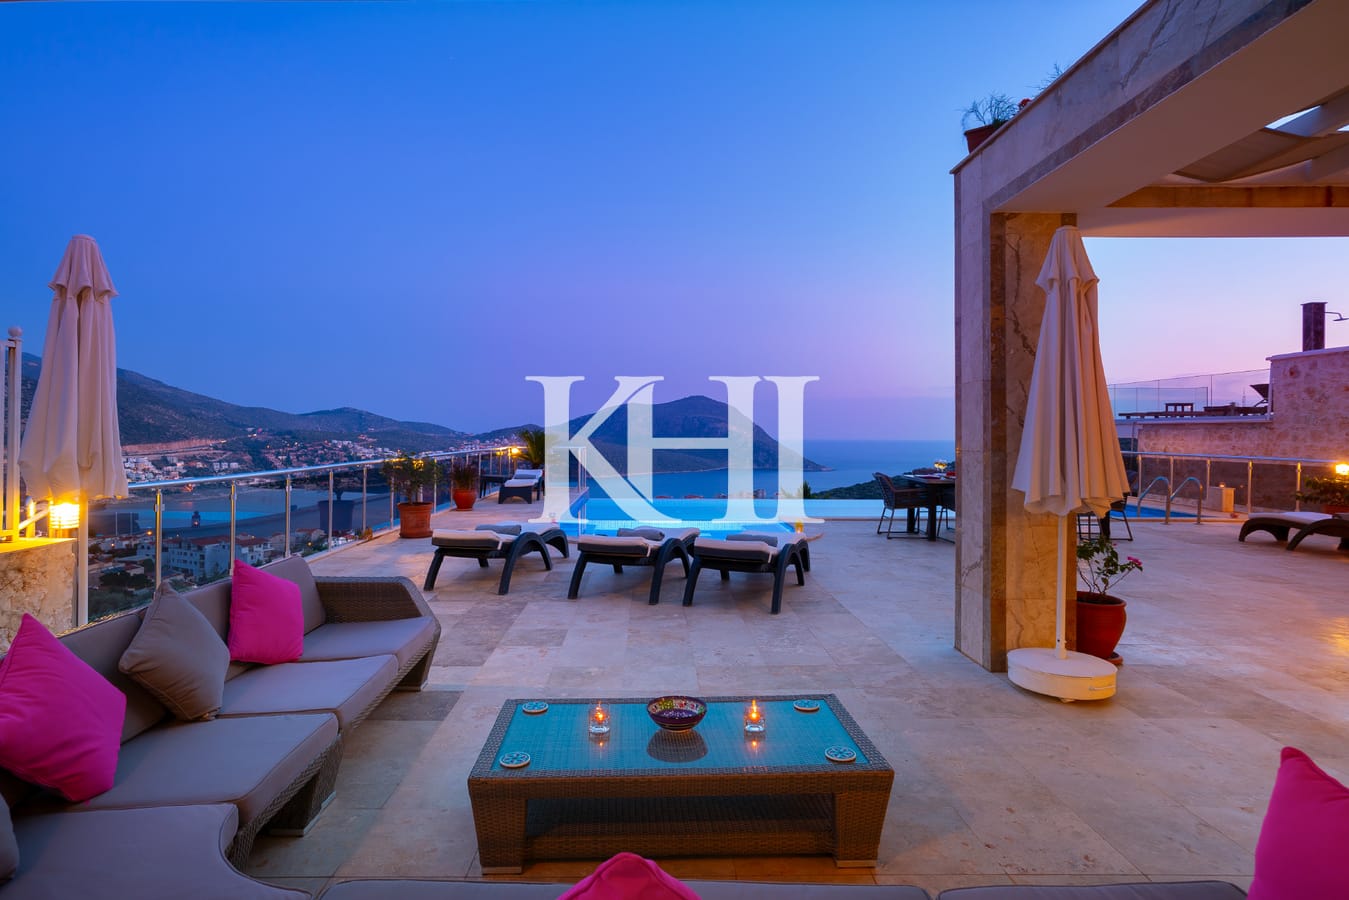 Detached Villa For Sale With Panoramic Kalkan View Slide Image 11